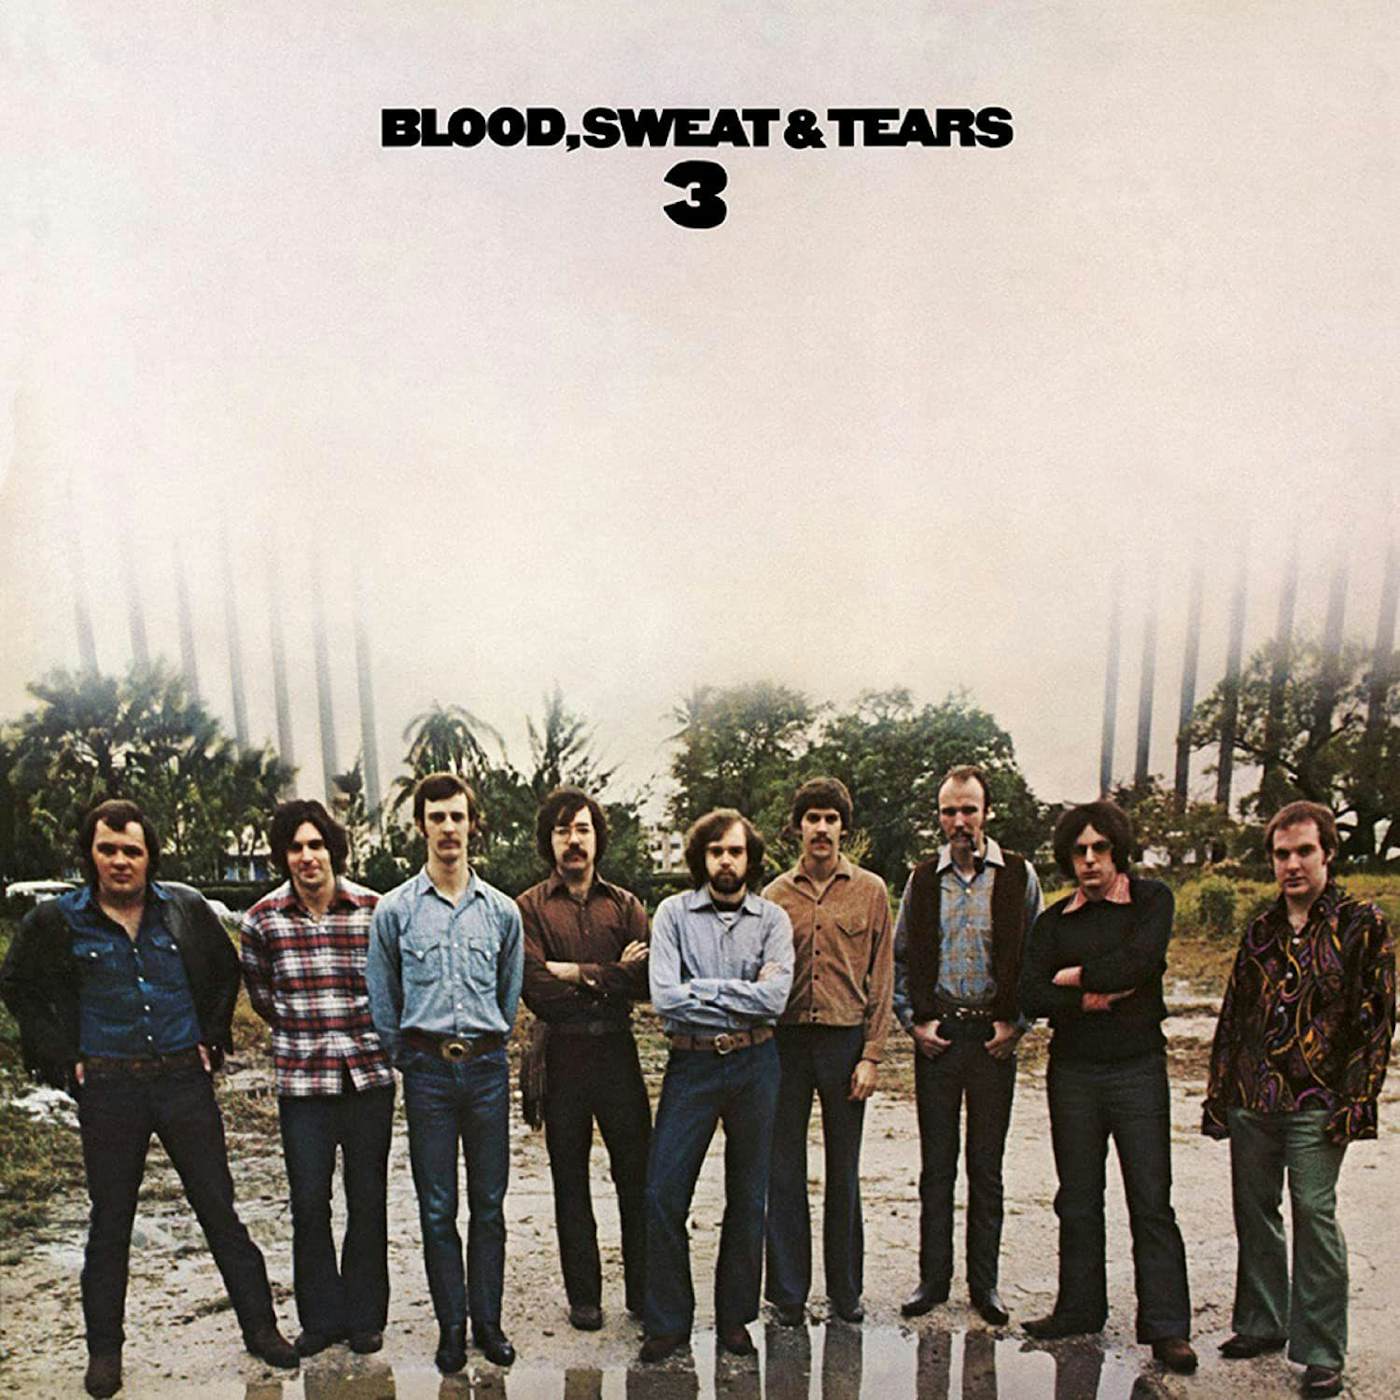 Blood, Sweat & Tears 3 (180g/Limited Edition/Gatefold Cover) Vinyl Record